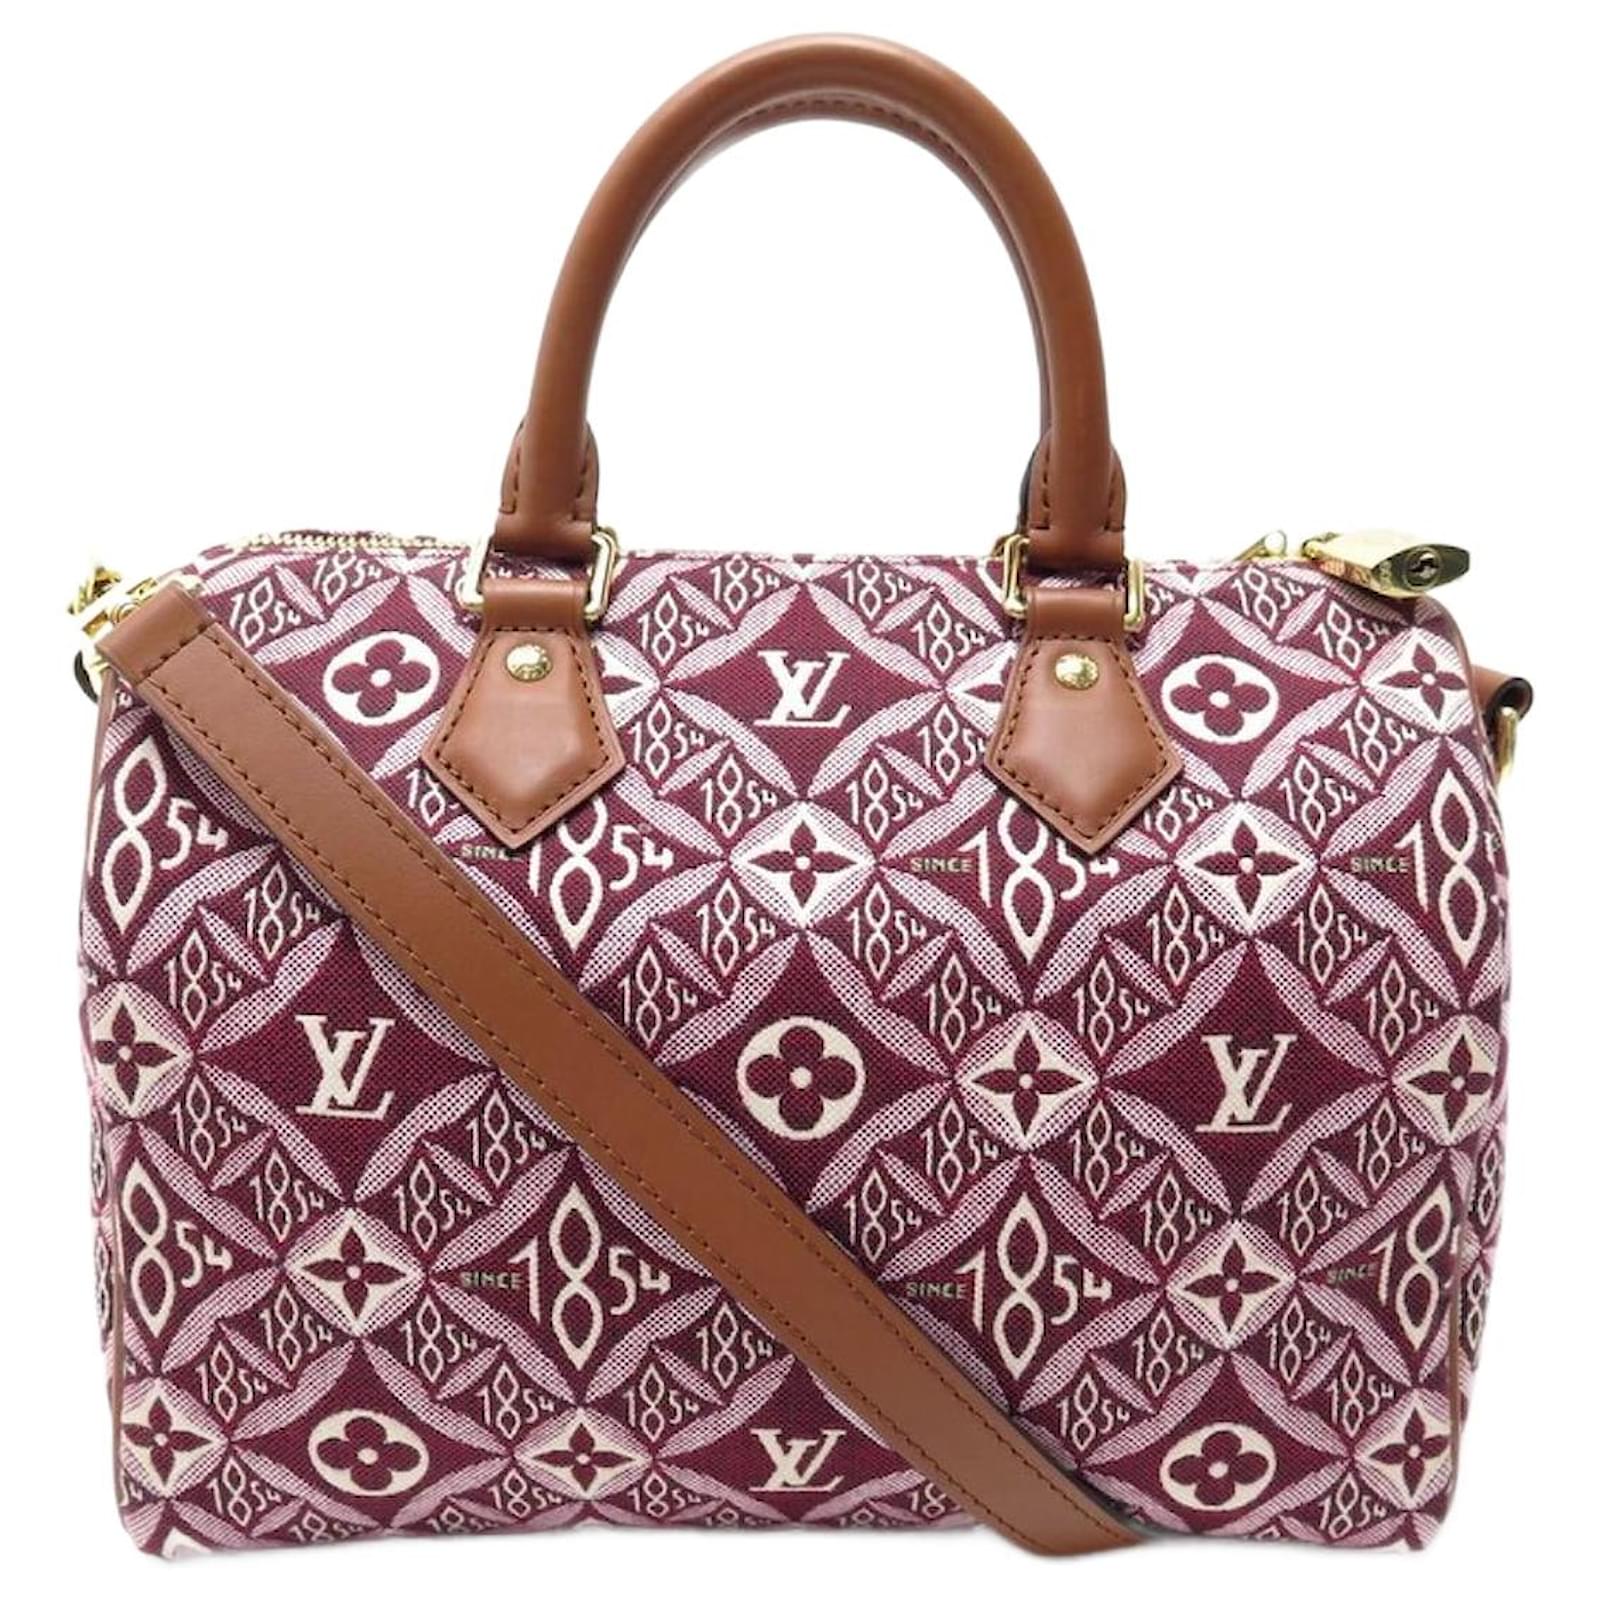 Louis Vuitton Since 1854 Speedy Bandouliere 25 Bag in Red White